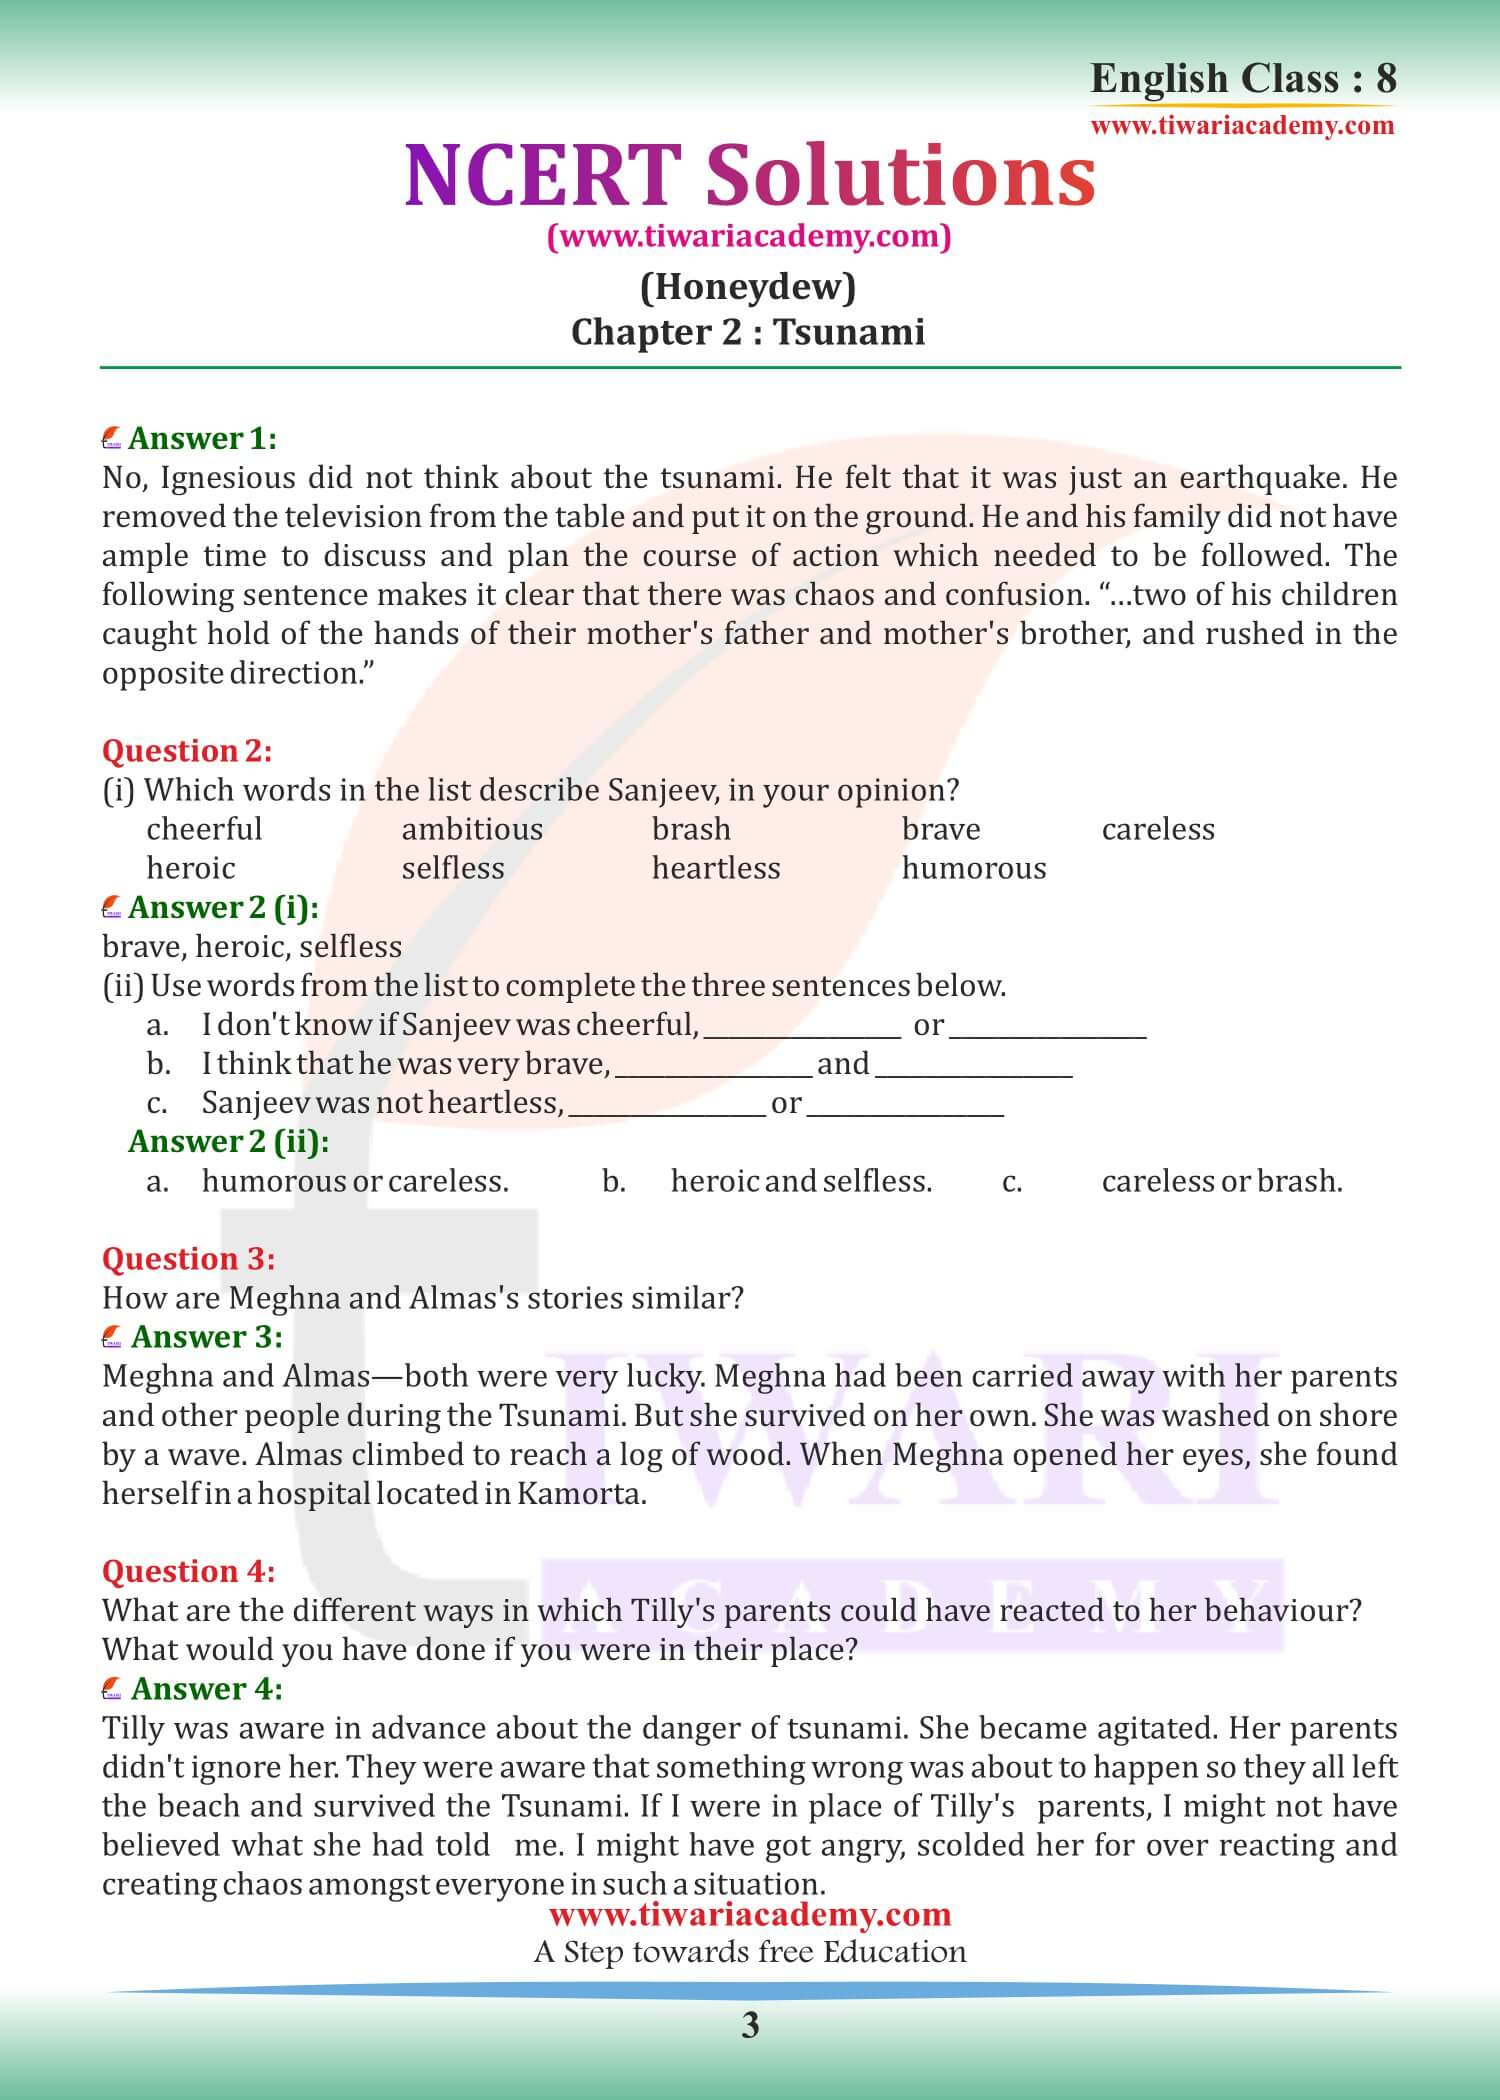 NCERT Solutions for Class 8 English Honeydew Chapter 2 guide